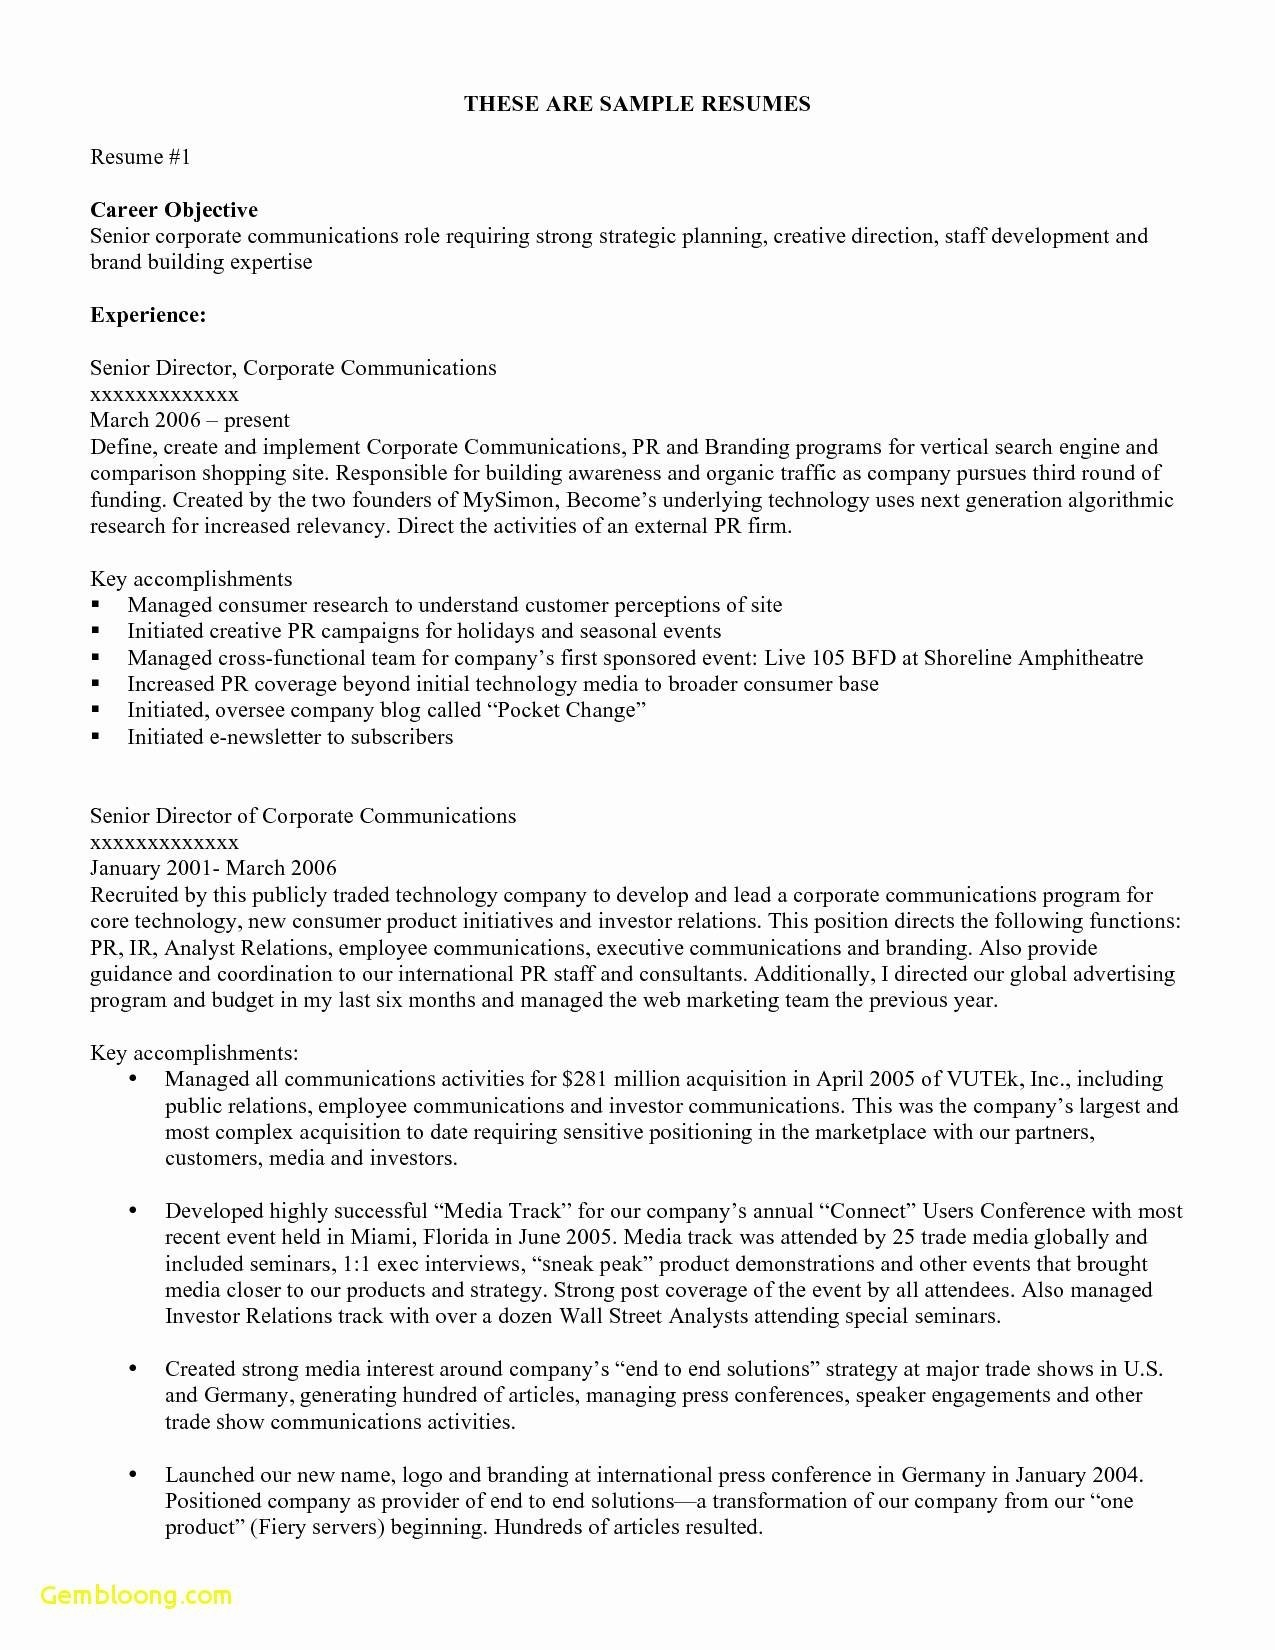 Letter to Shareholders Template - Resumes with Luxury Resume Articles Simple Elegant Examples